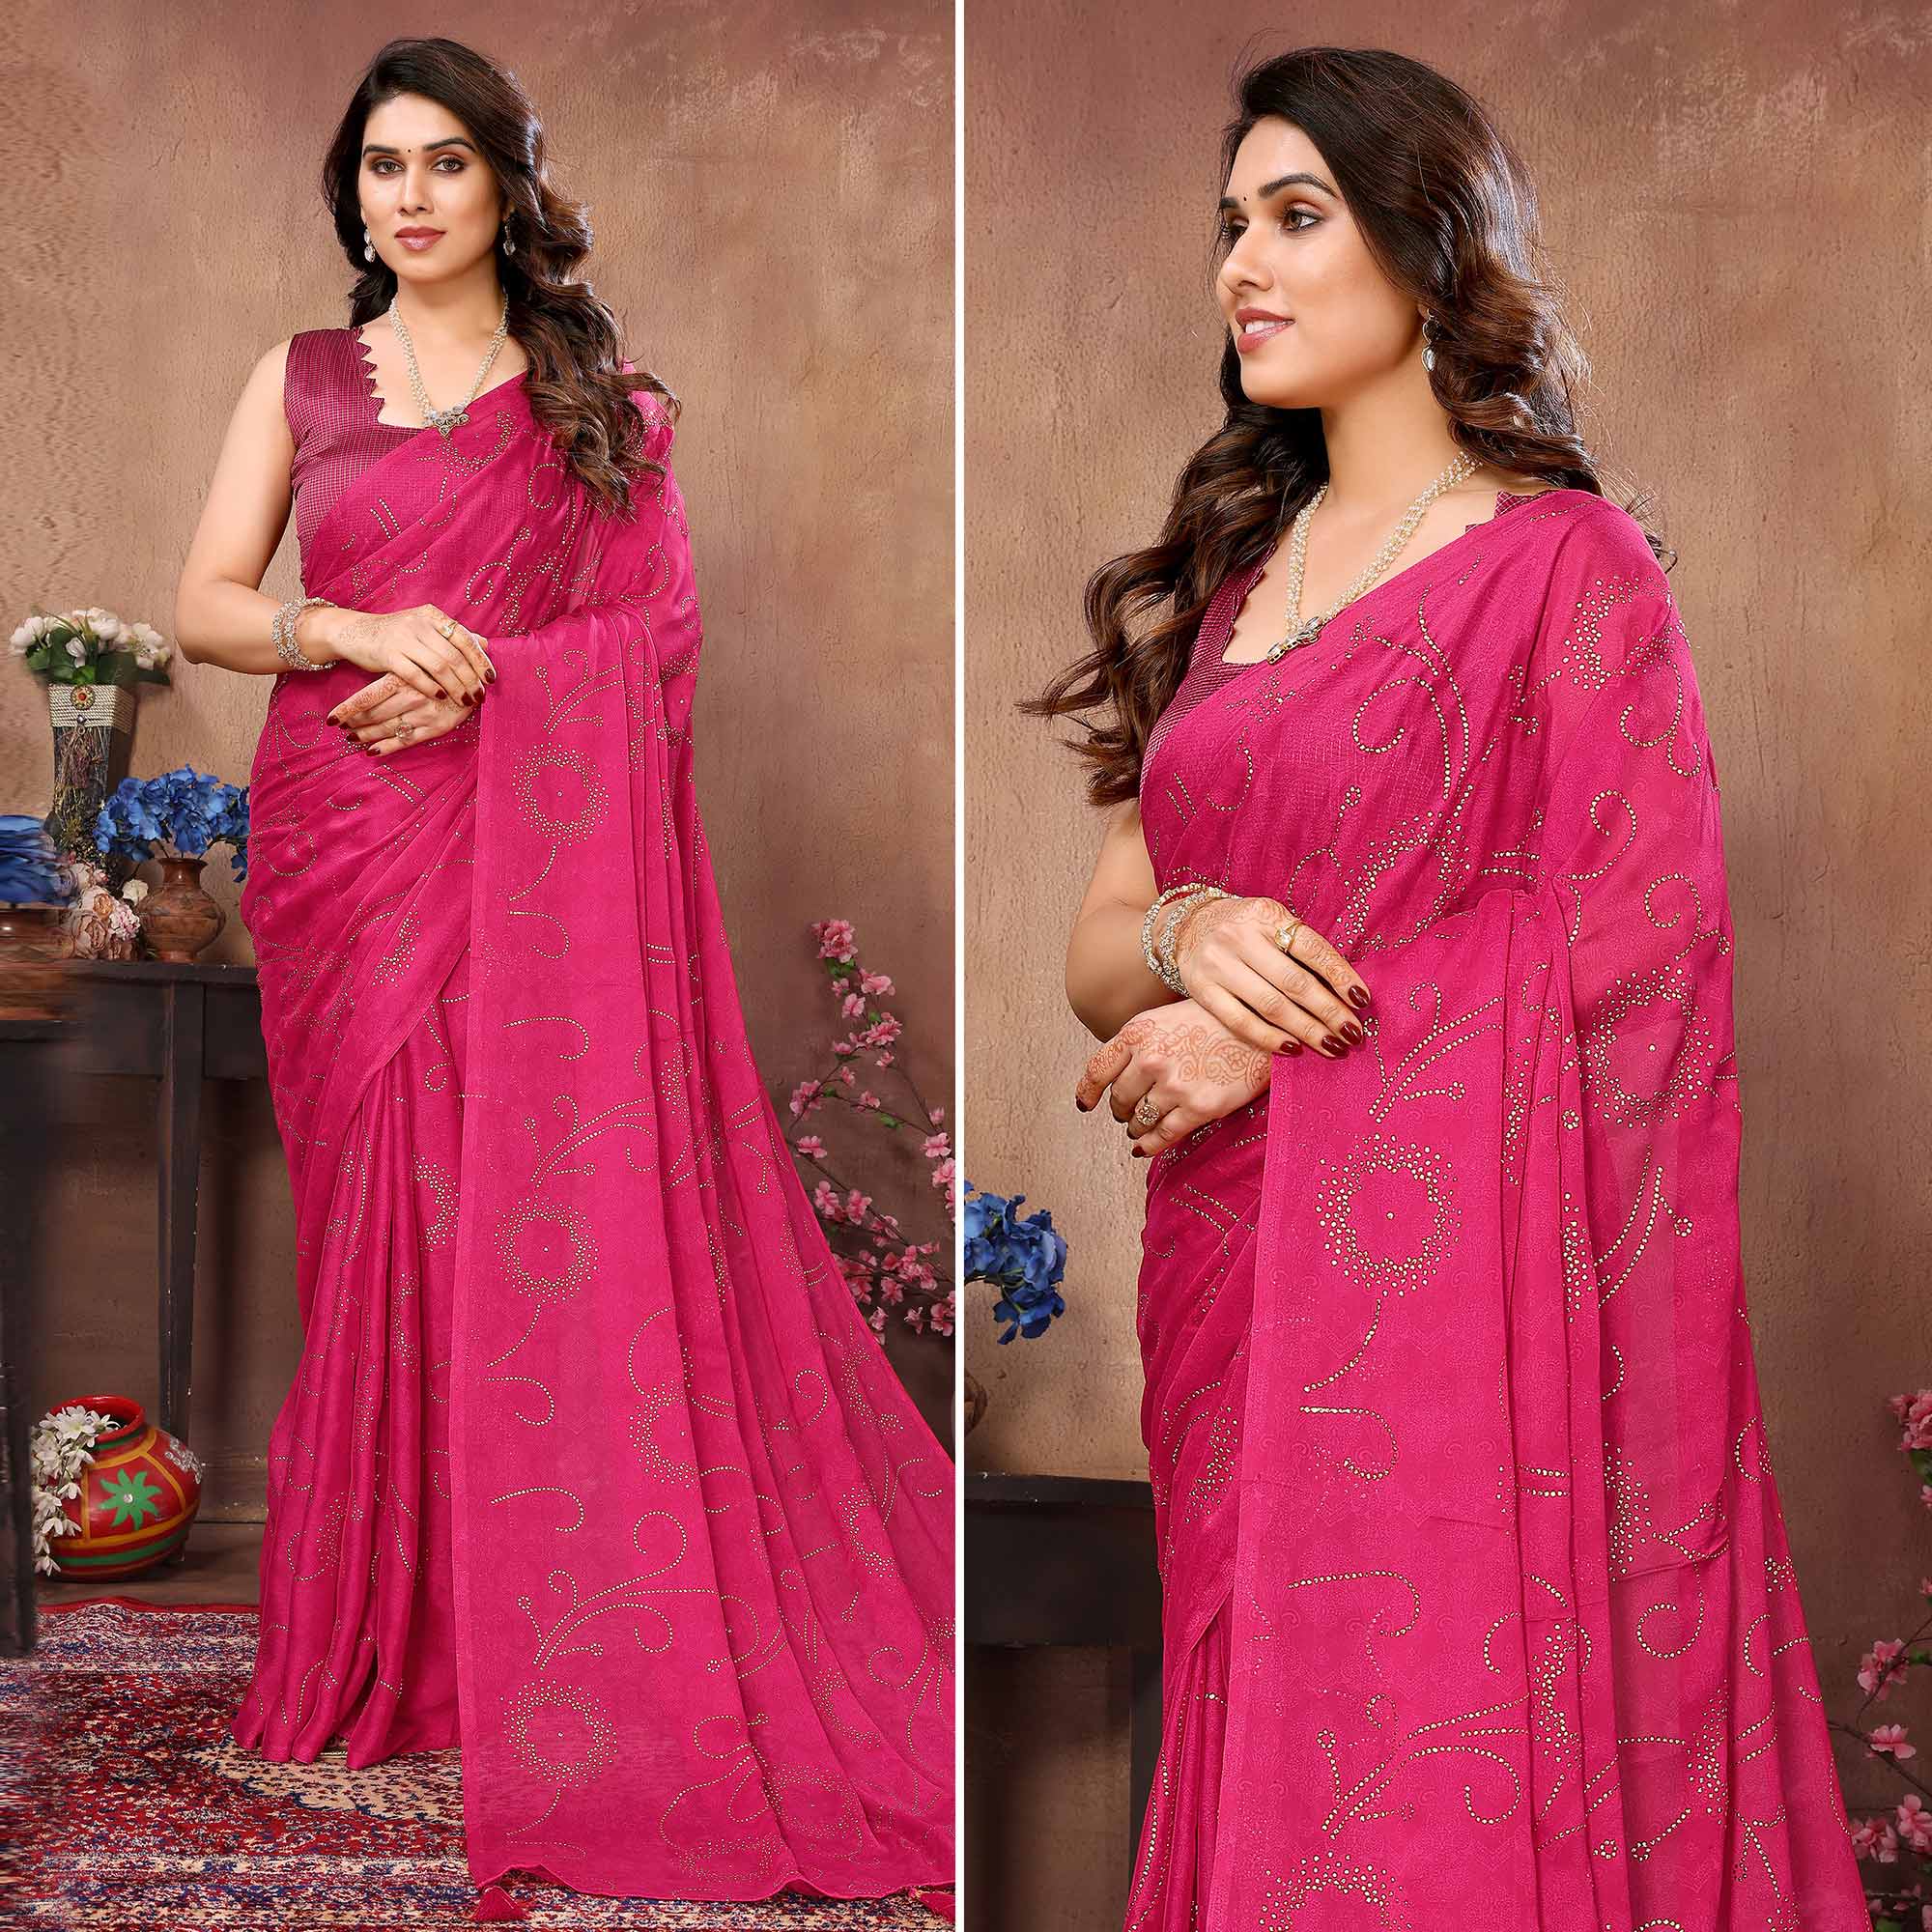 Rani Pink Mukaish With Foil Printed Silk Saree With Tassels